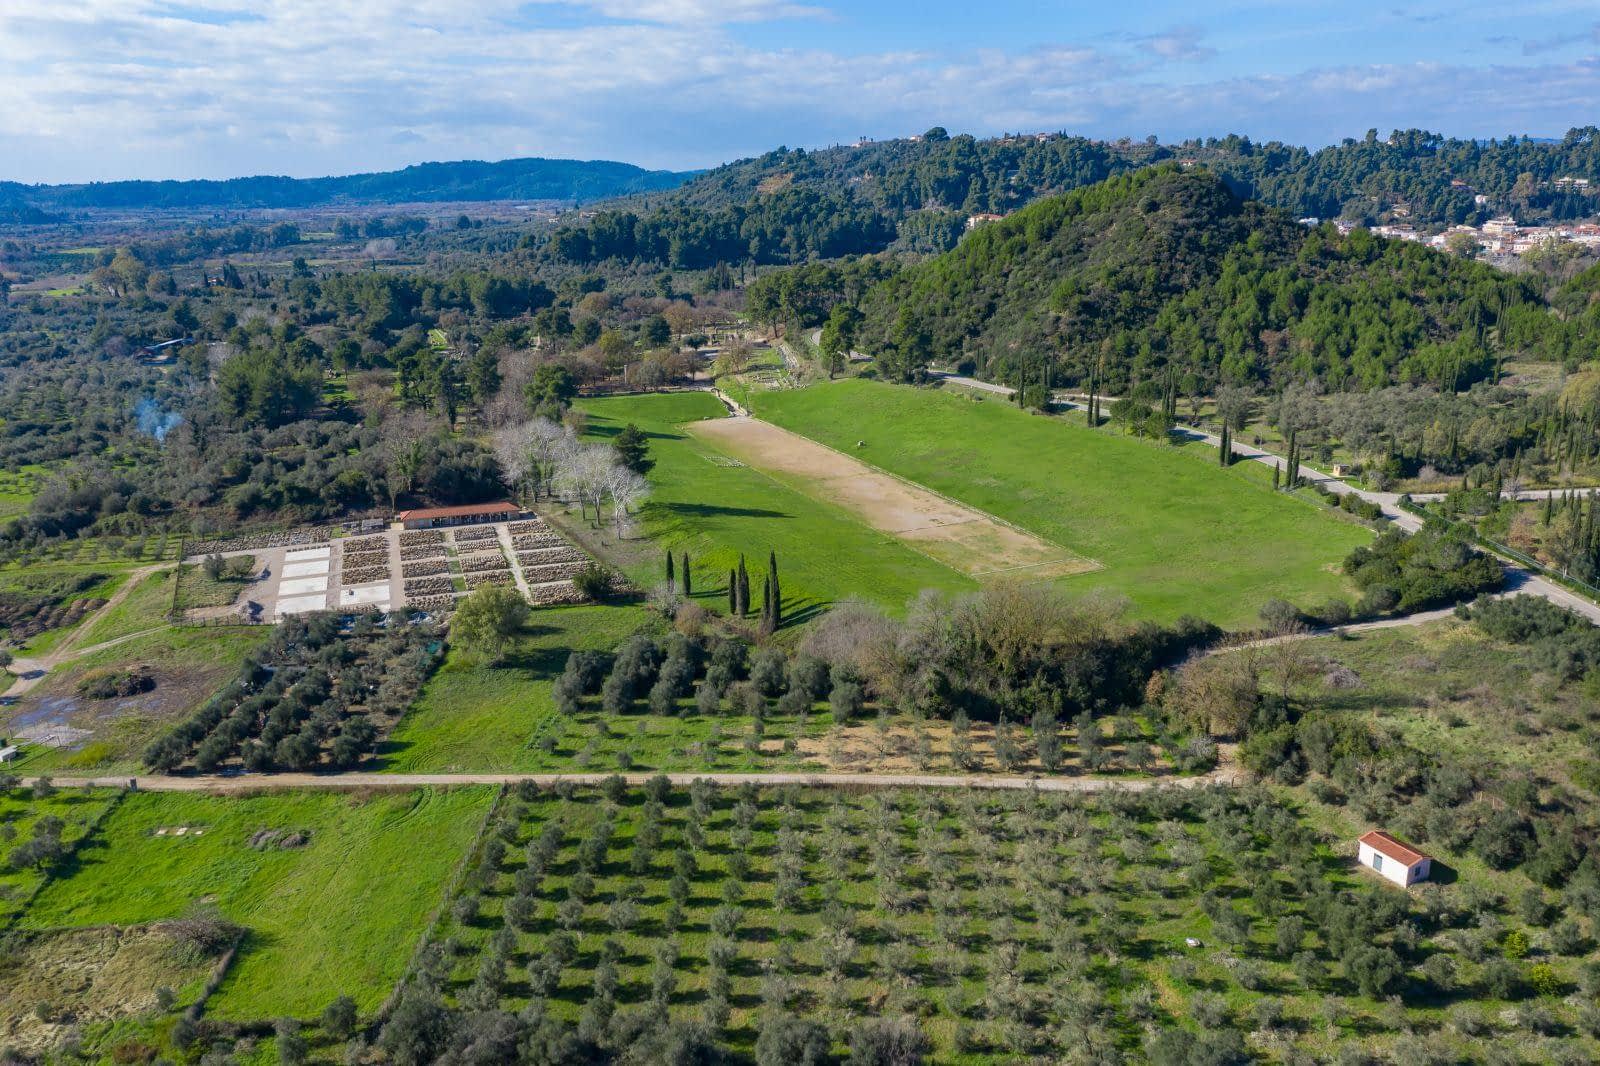 profiles-the-best-olive-oils-production-europe-new-generation-in-ancient-olympia-introduces-awardwinning-products-to-the-world-olive-oil-times